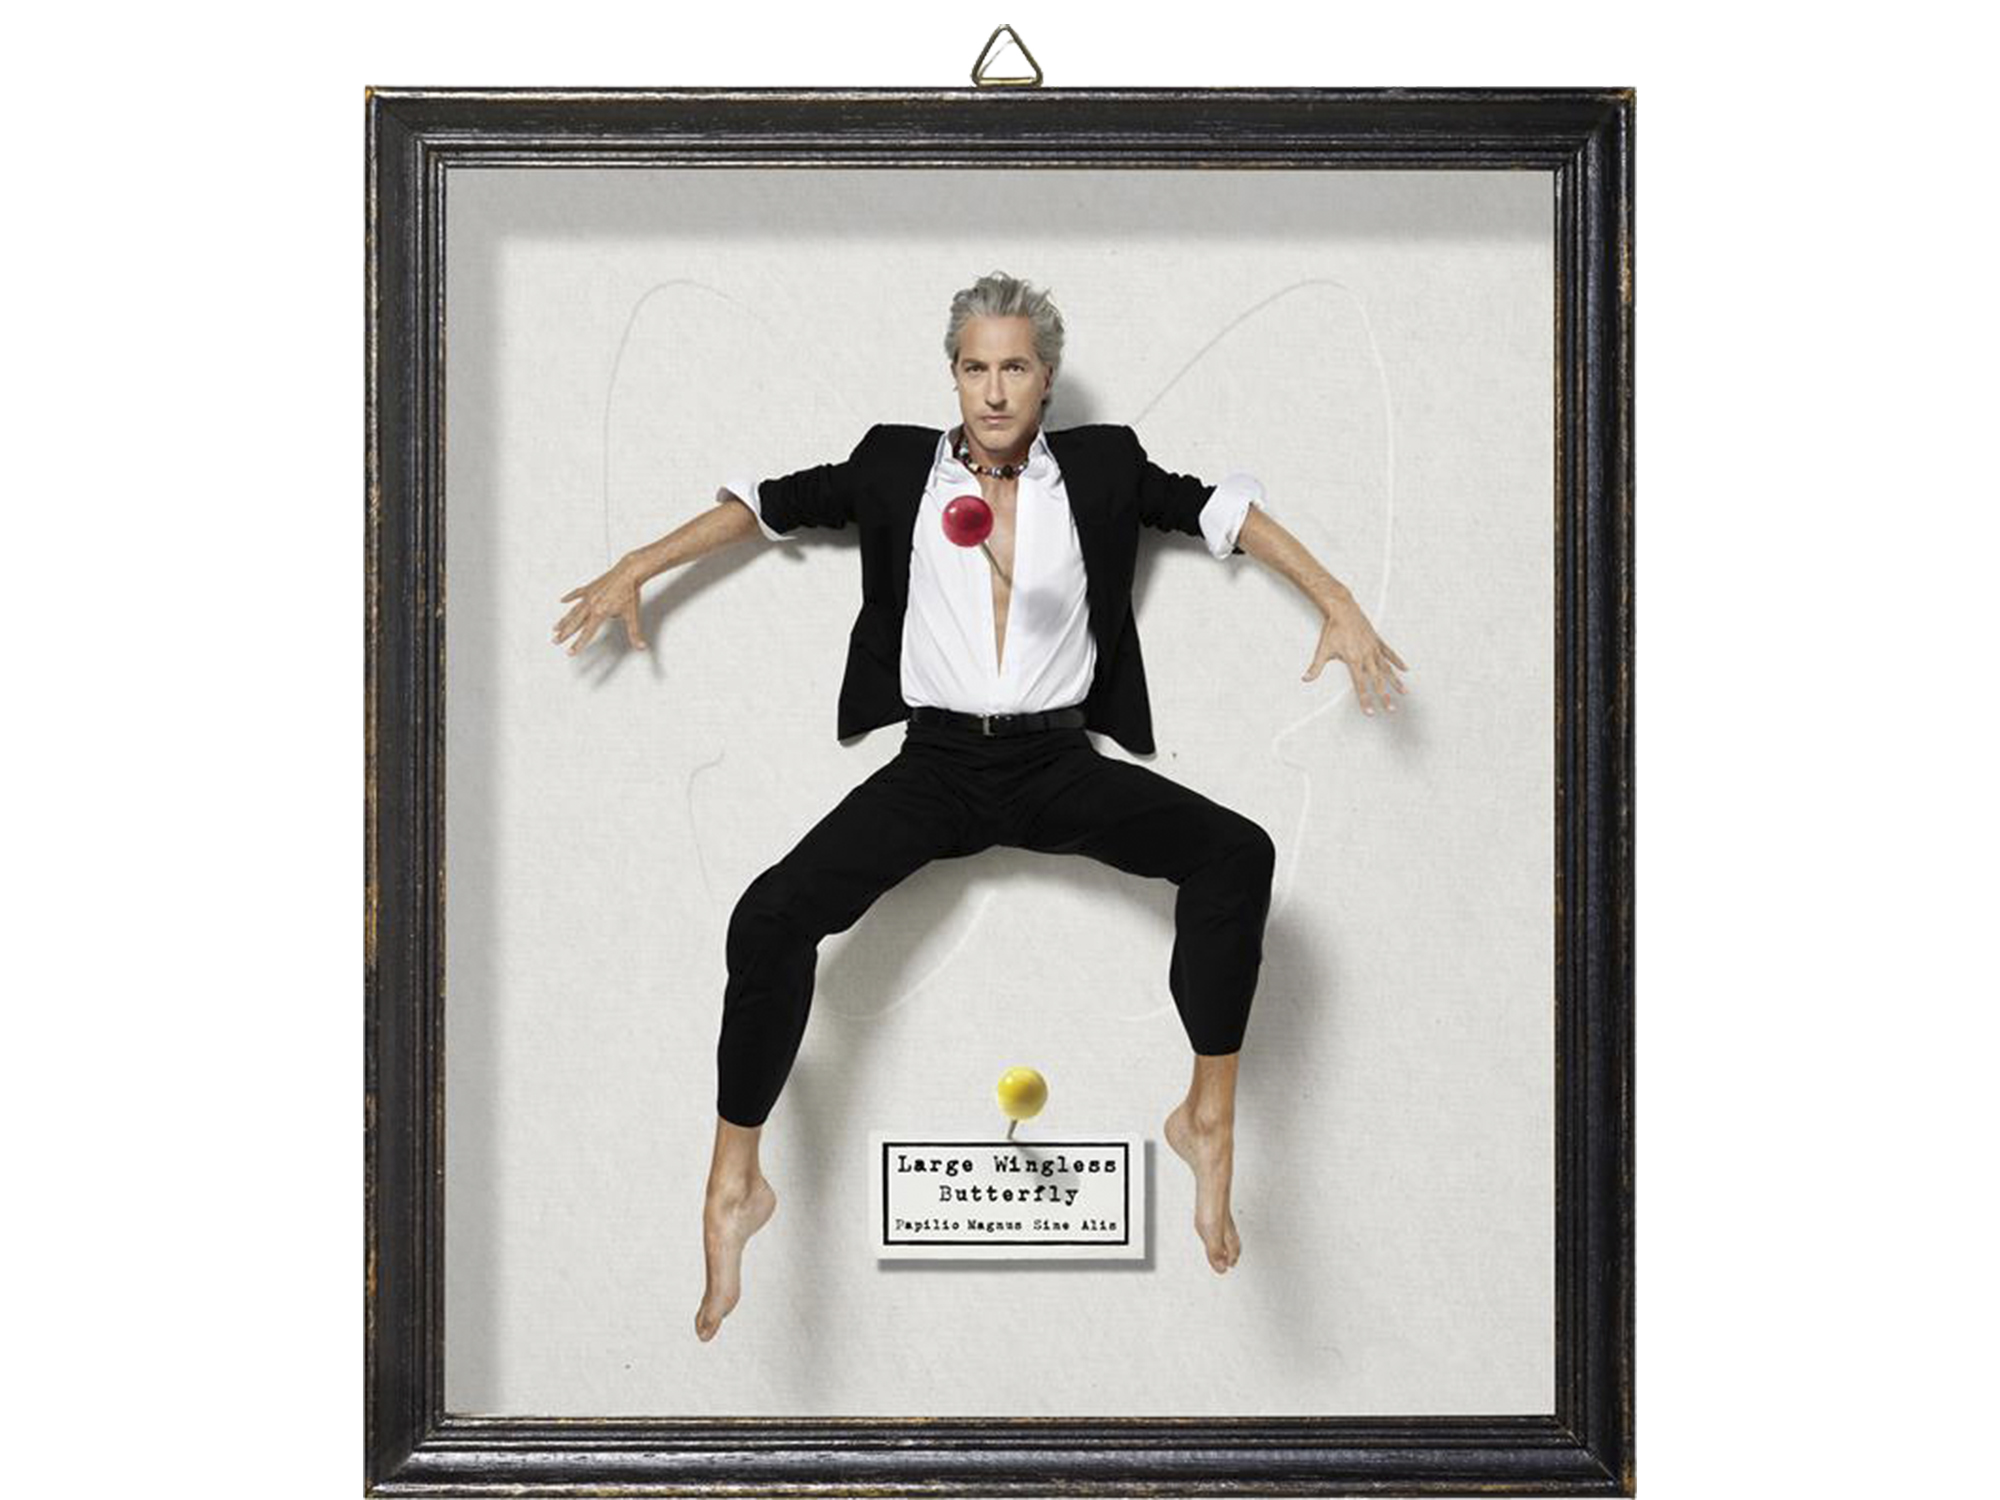 Interview with Marcel Wanders